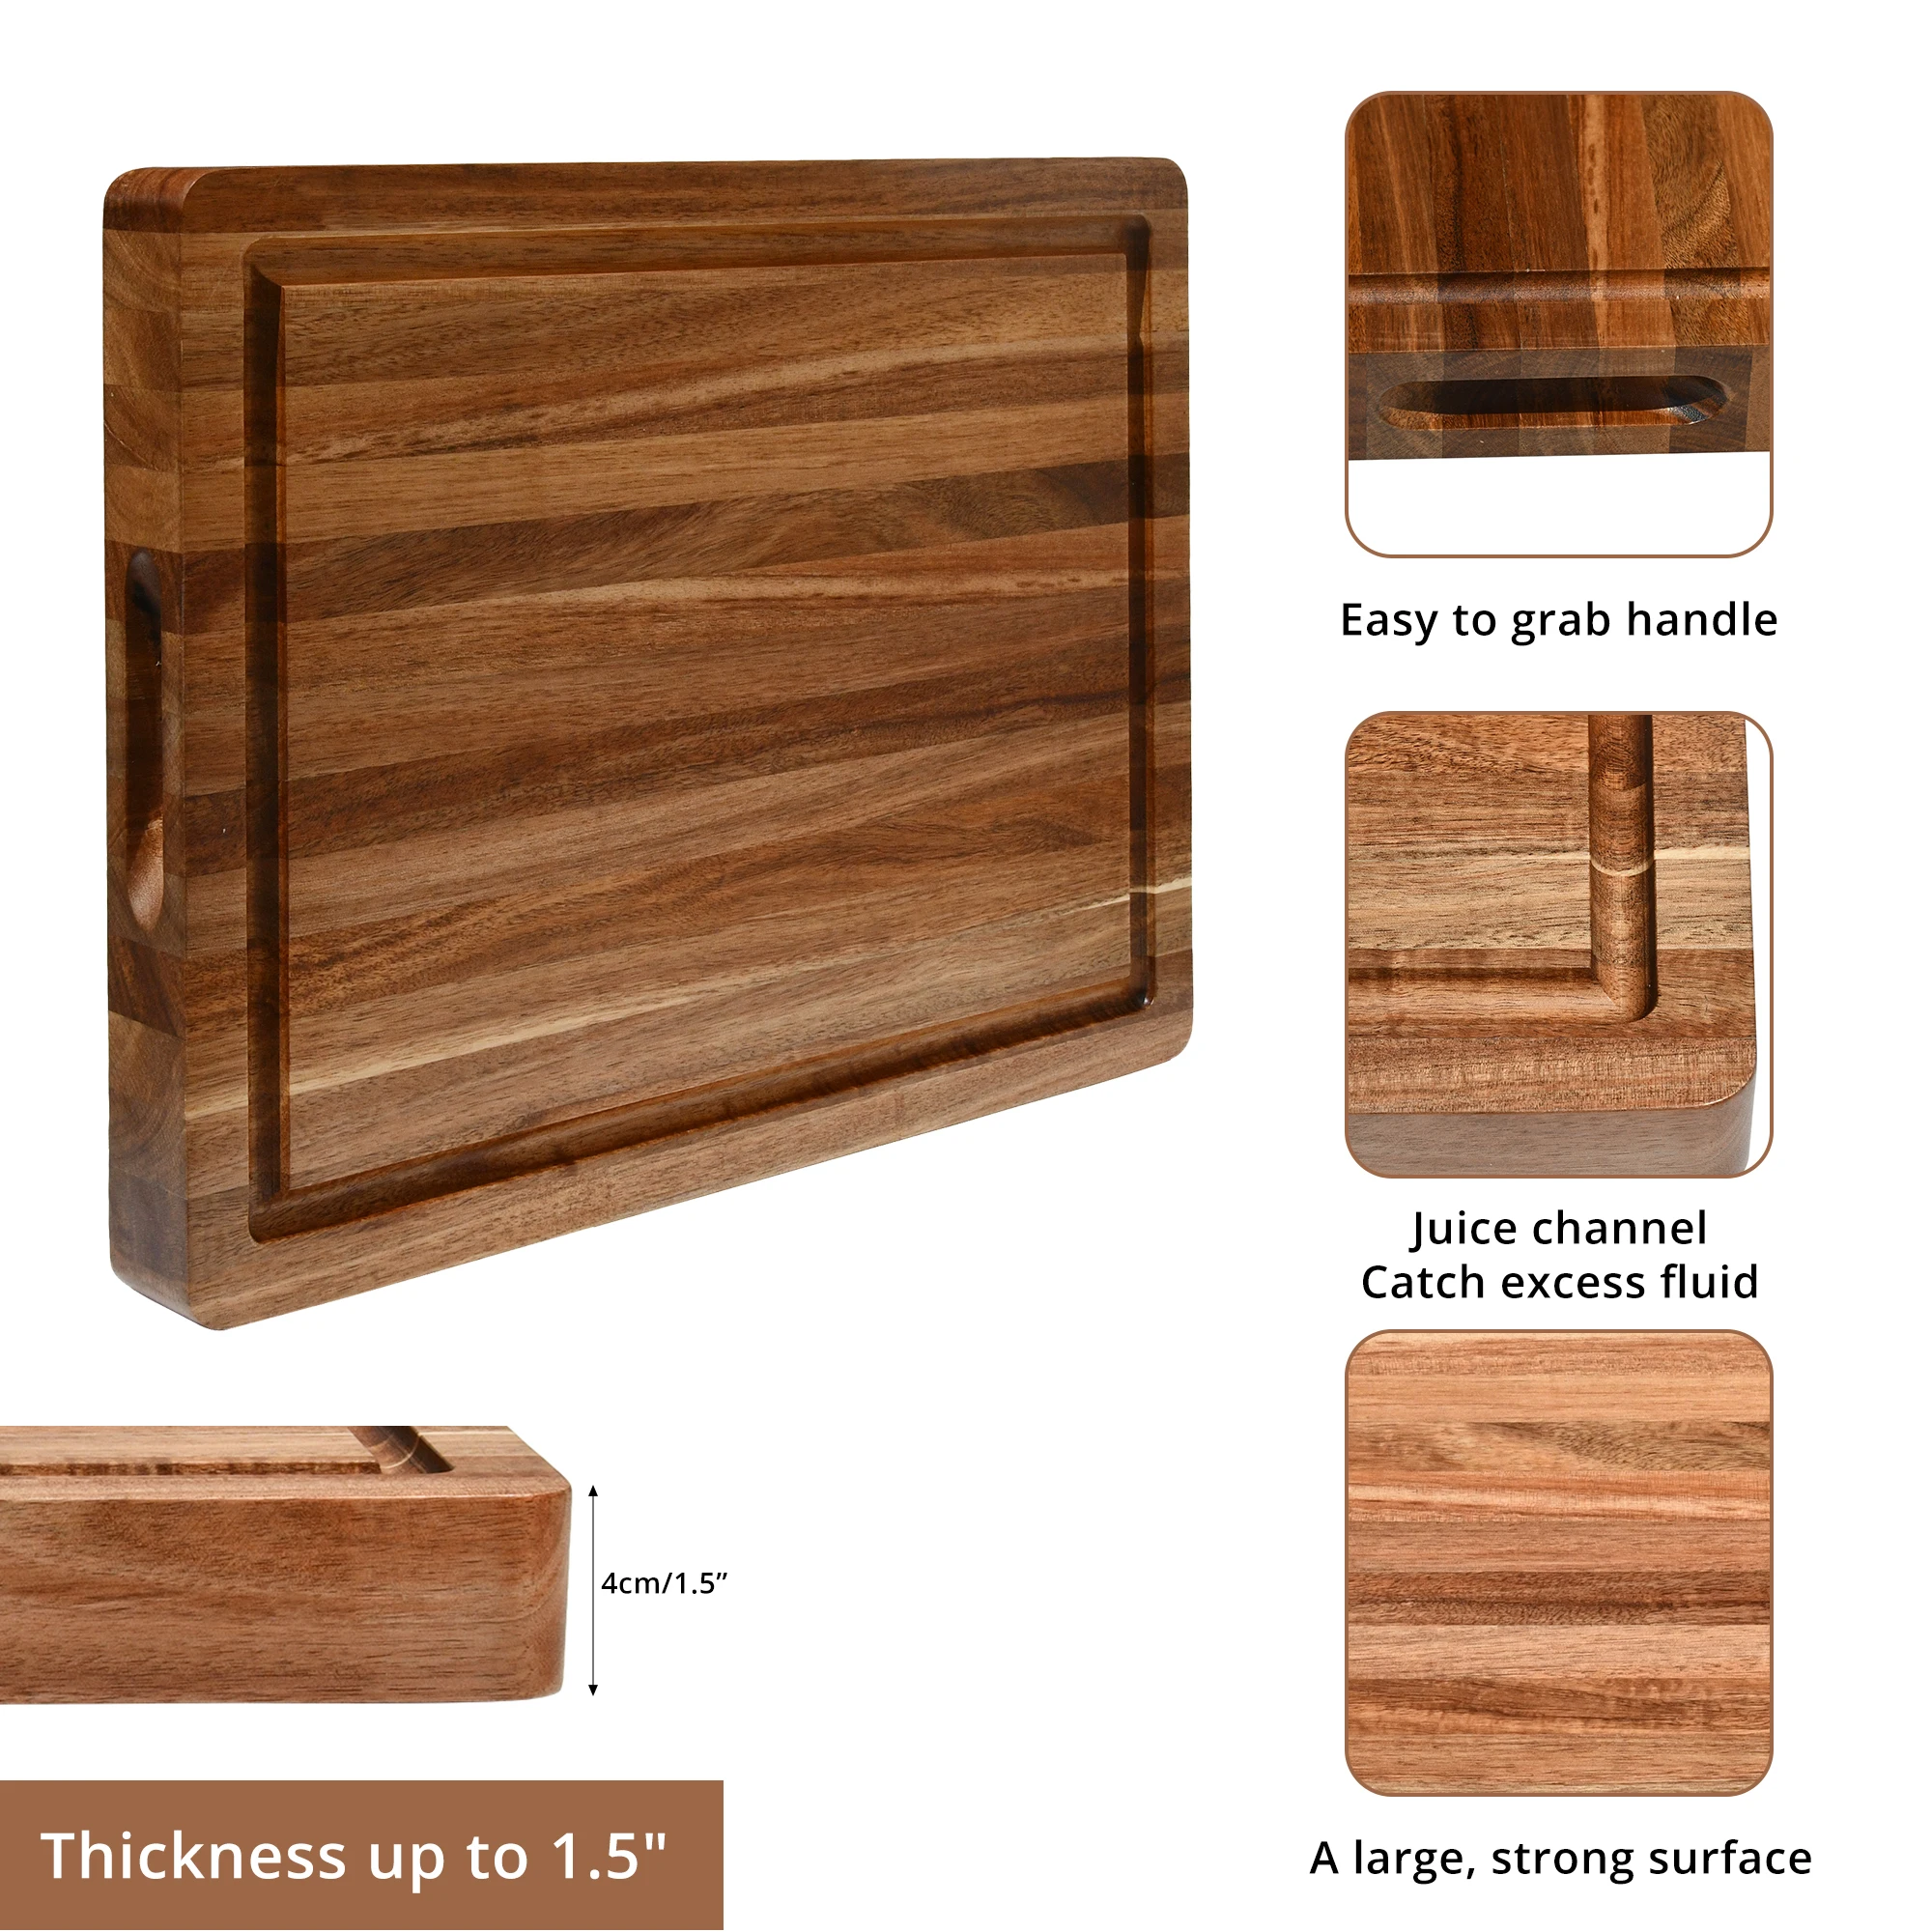 Large Thick Wood Cutting Board Edge Grain Juice Groove Hand Grips Reversible Lifetime Replacement For Kitchen